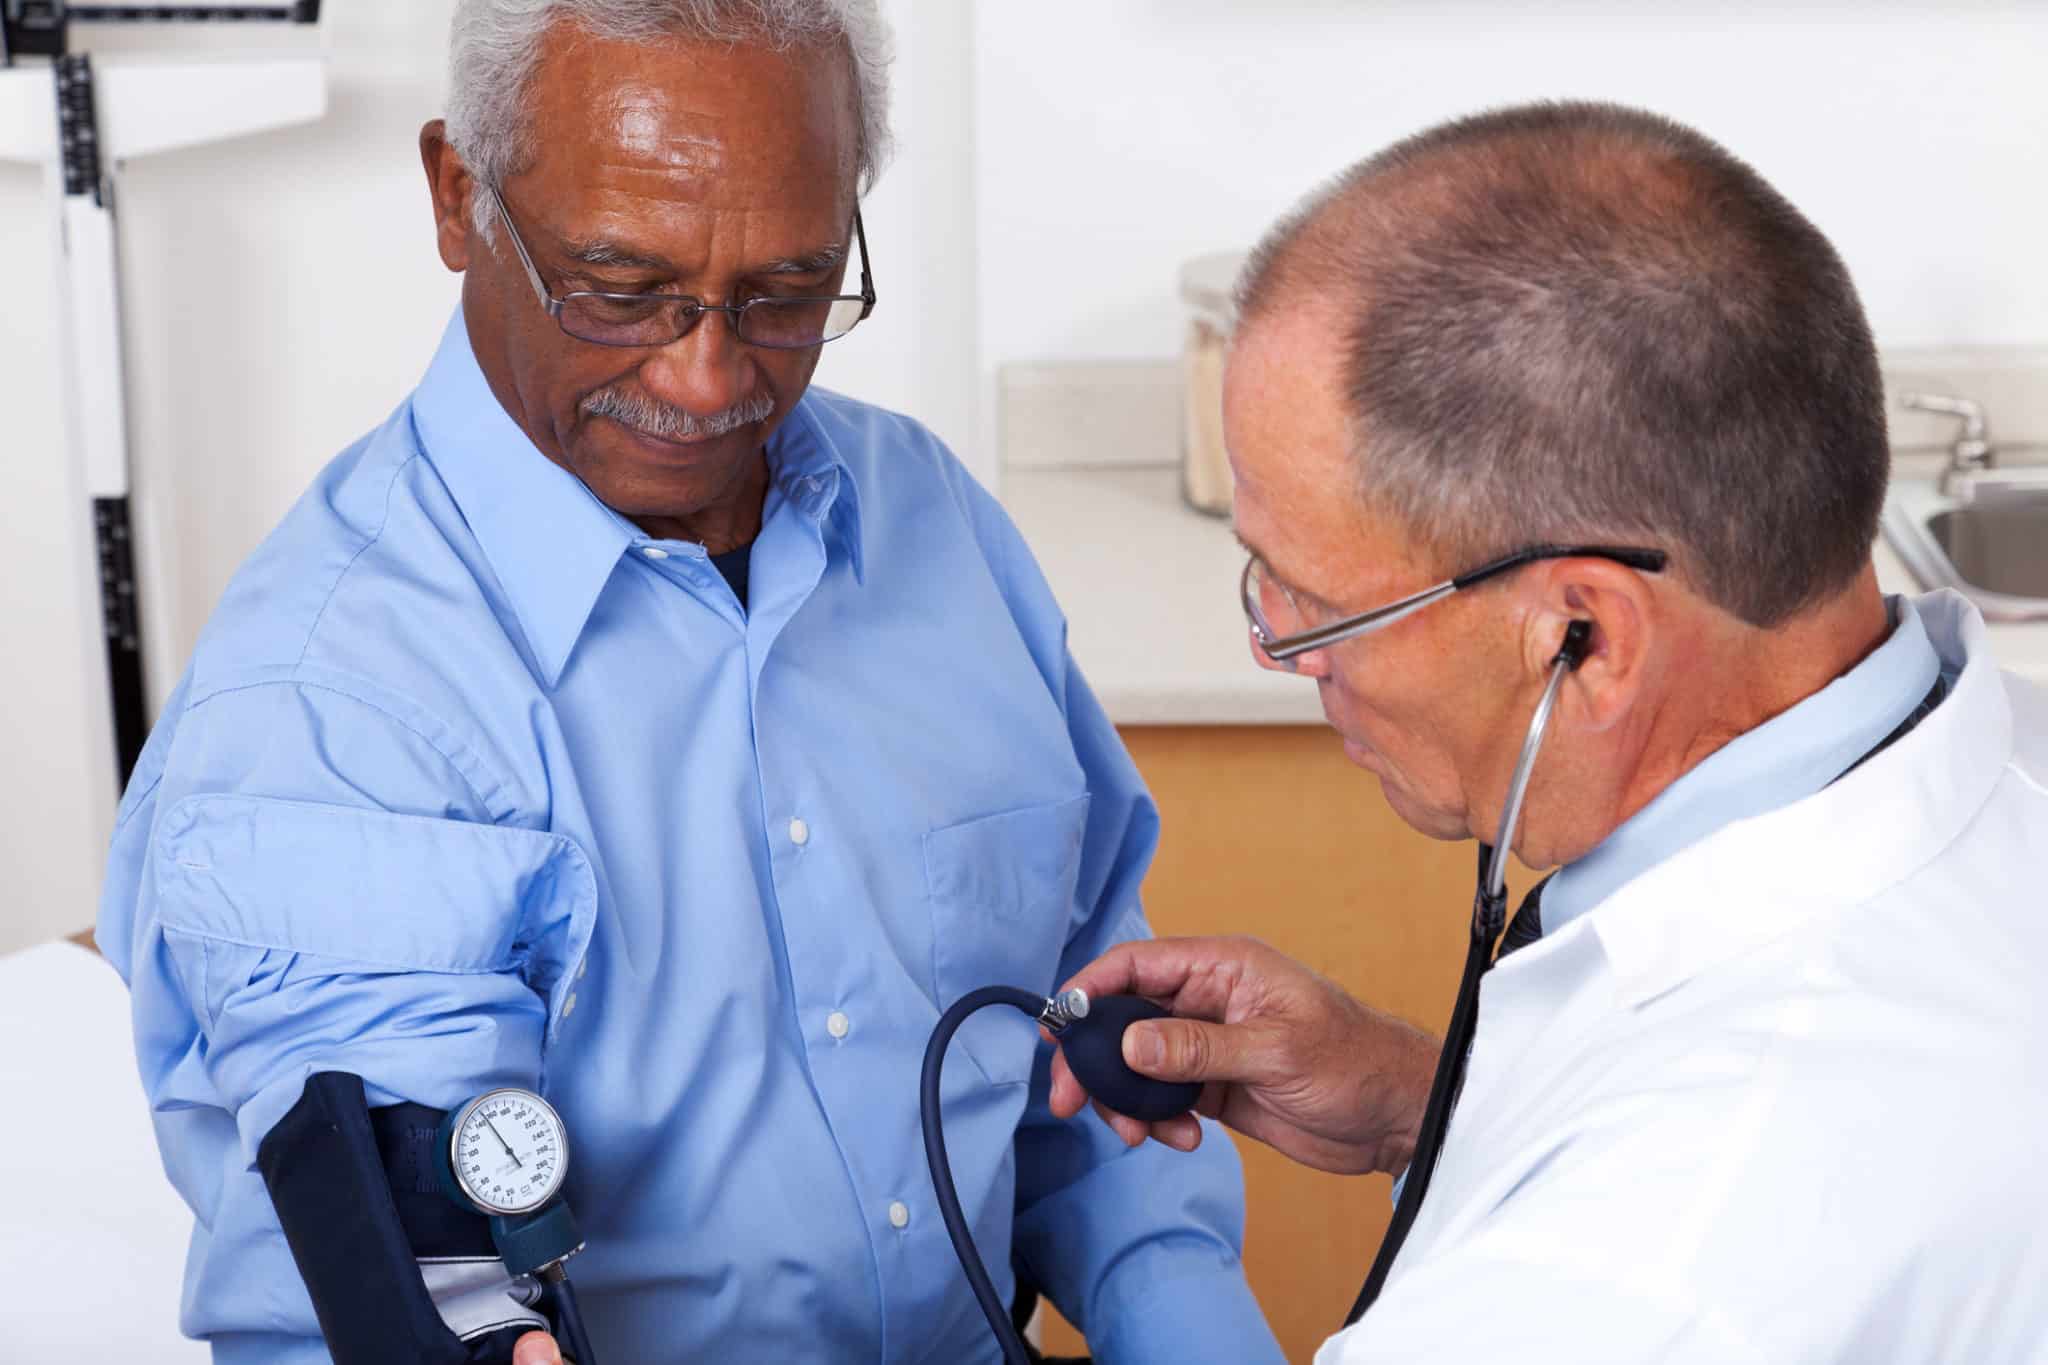 Doctor Checking Blood Pressure